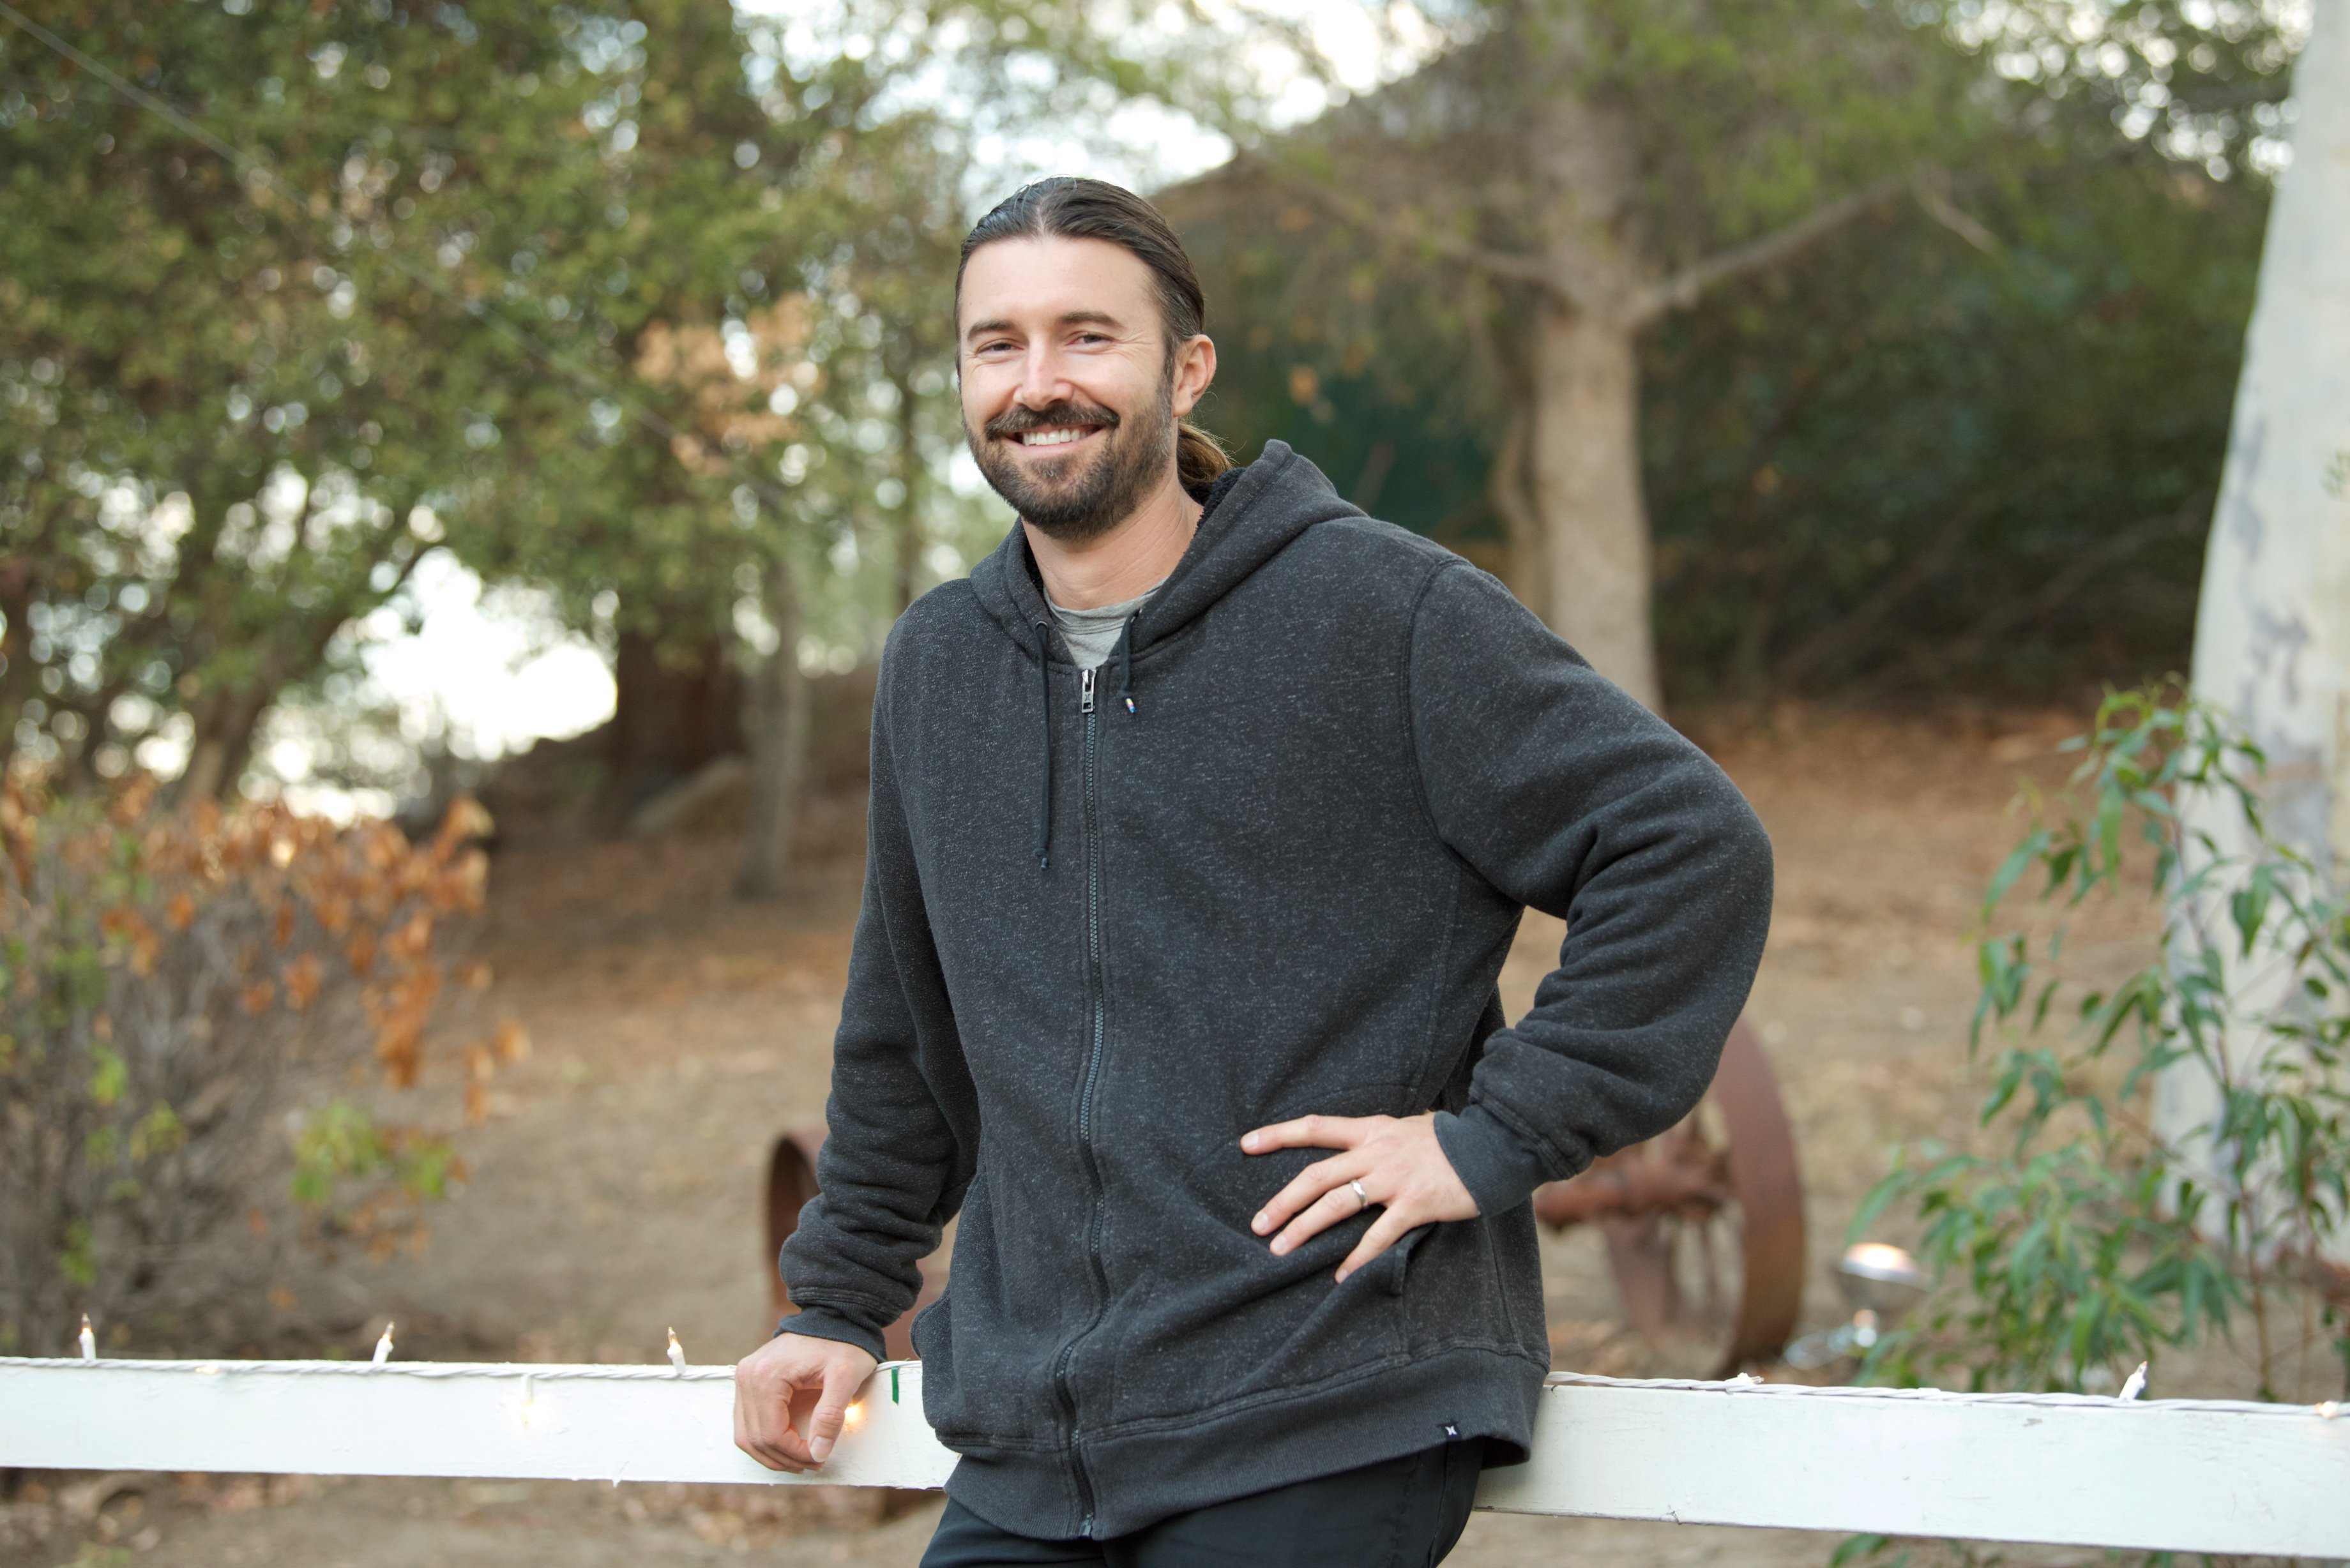 Brandon Jenner poses at a record release party for "Burning Ground" in Malibu, California on November 19, 2016 | Photo: Getty Images